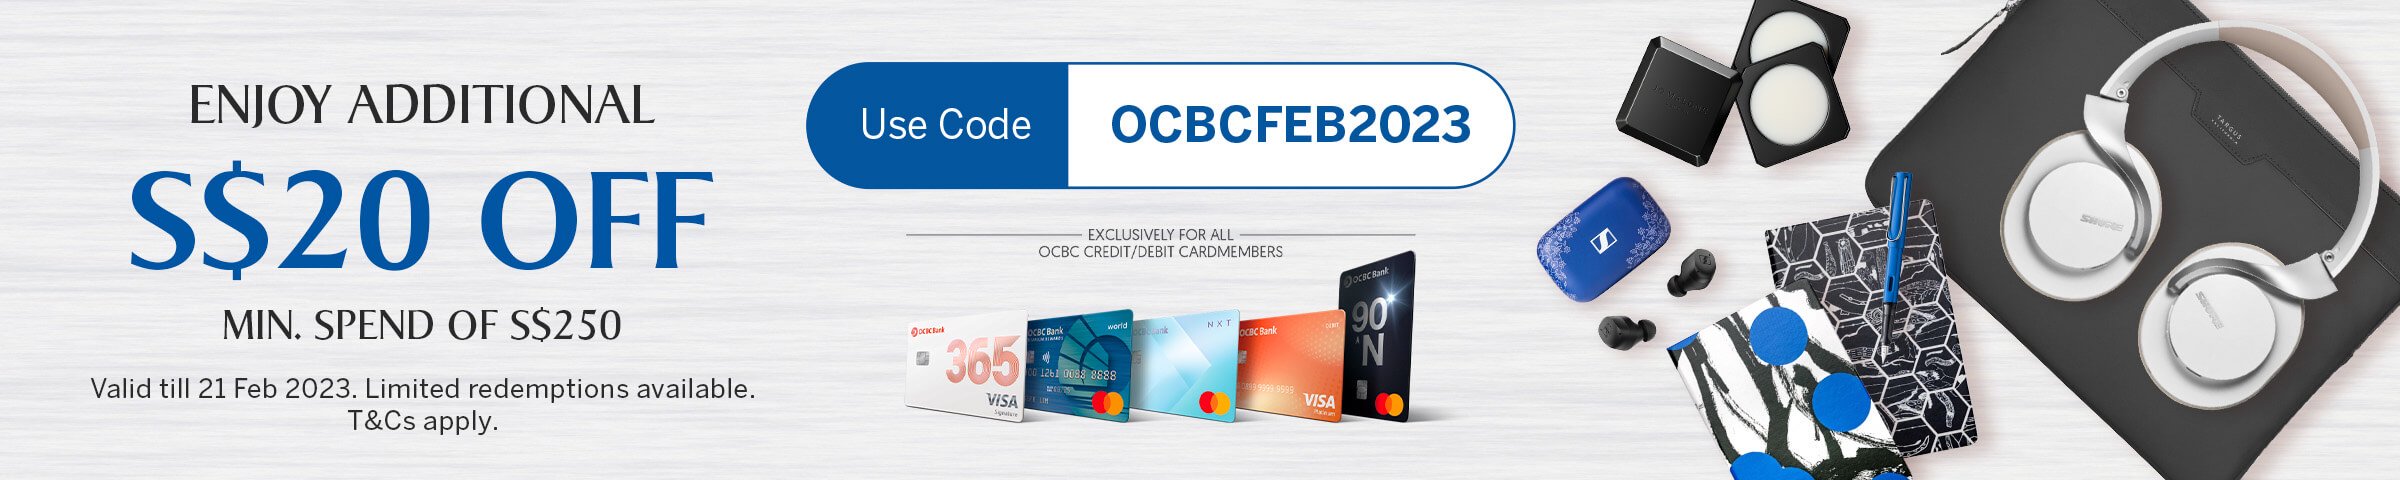 Exclusive Offer For OCBC Debit/Credit Cardmembers on KrisShop.com